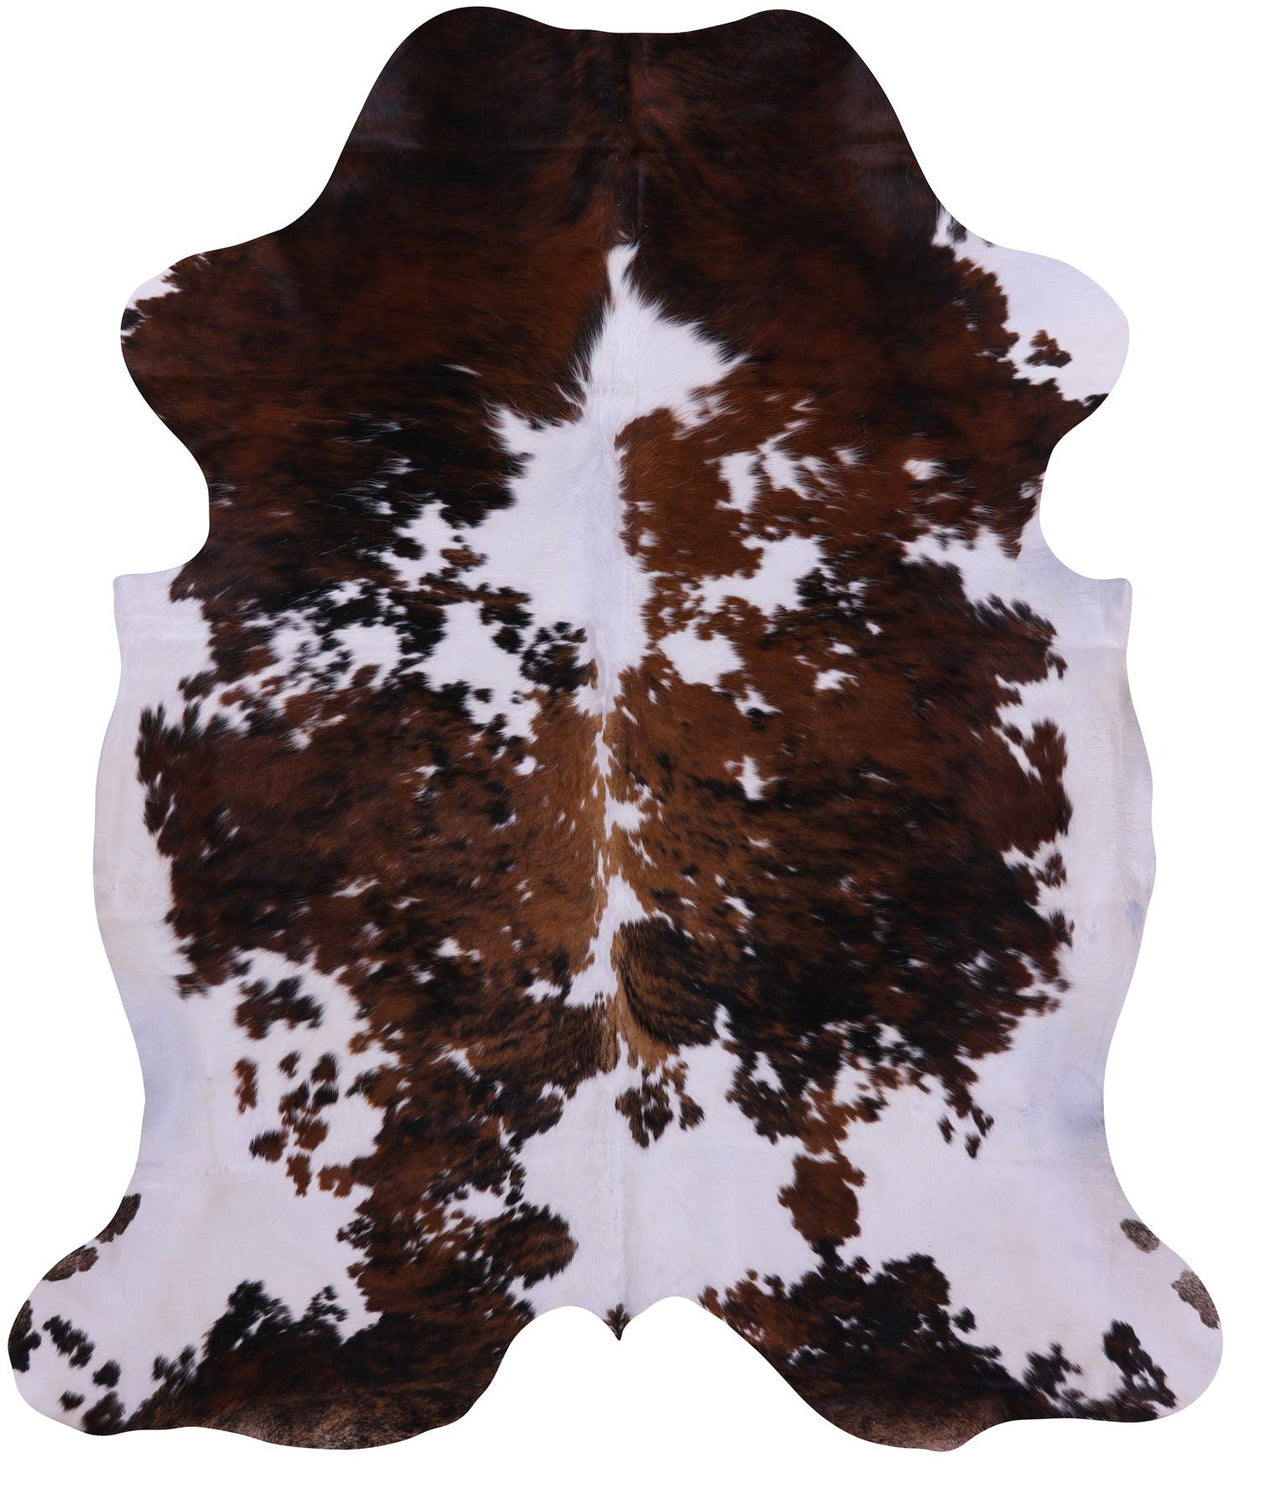 Brown & White Natural Cowhide Rug - Large 7'4"H x 6'3"W